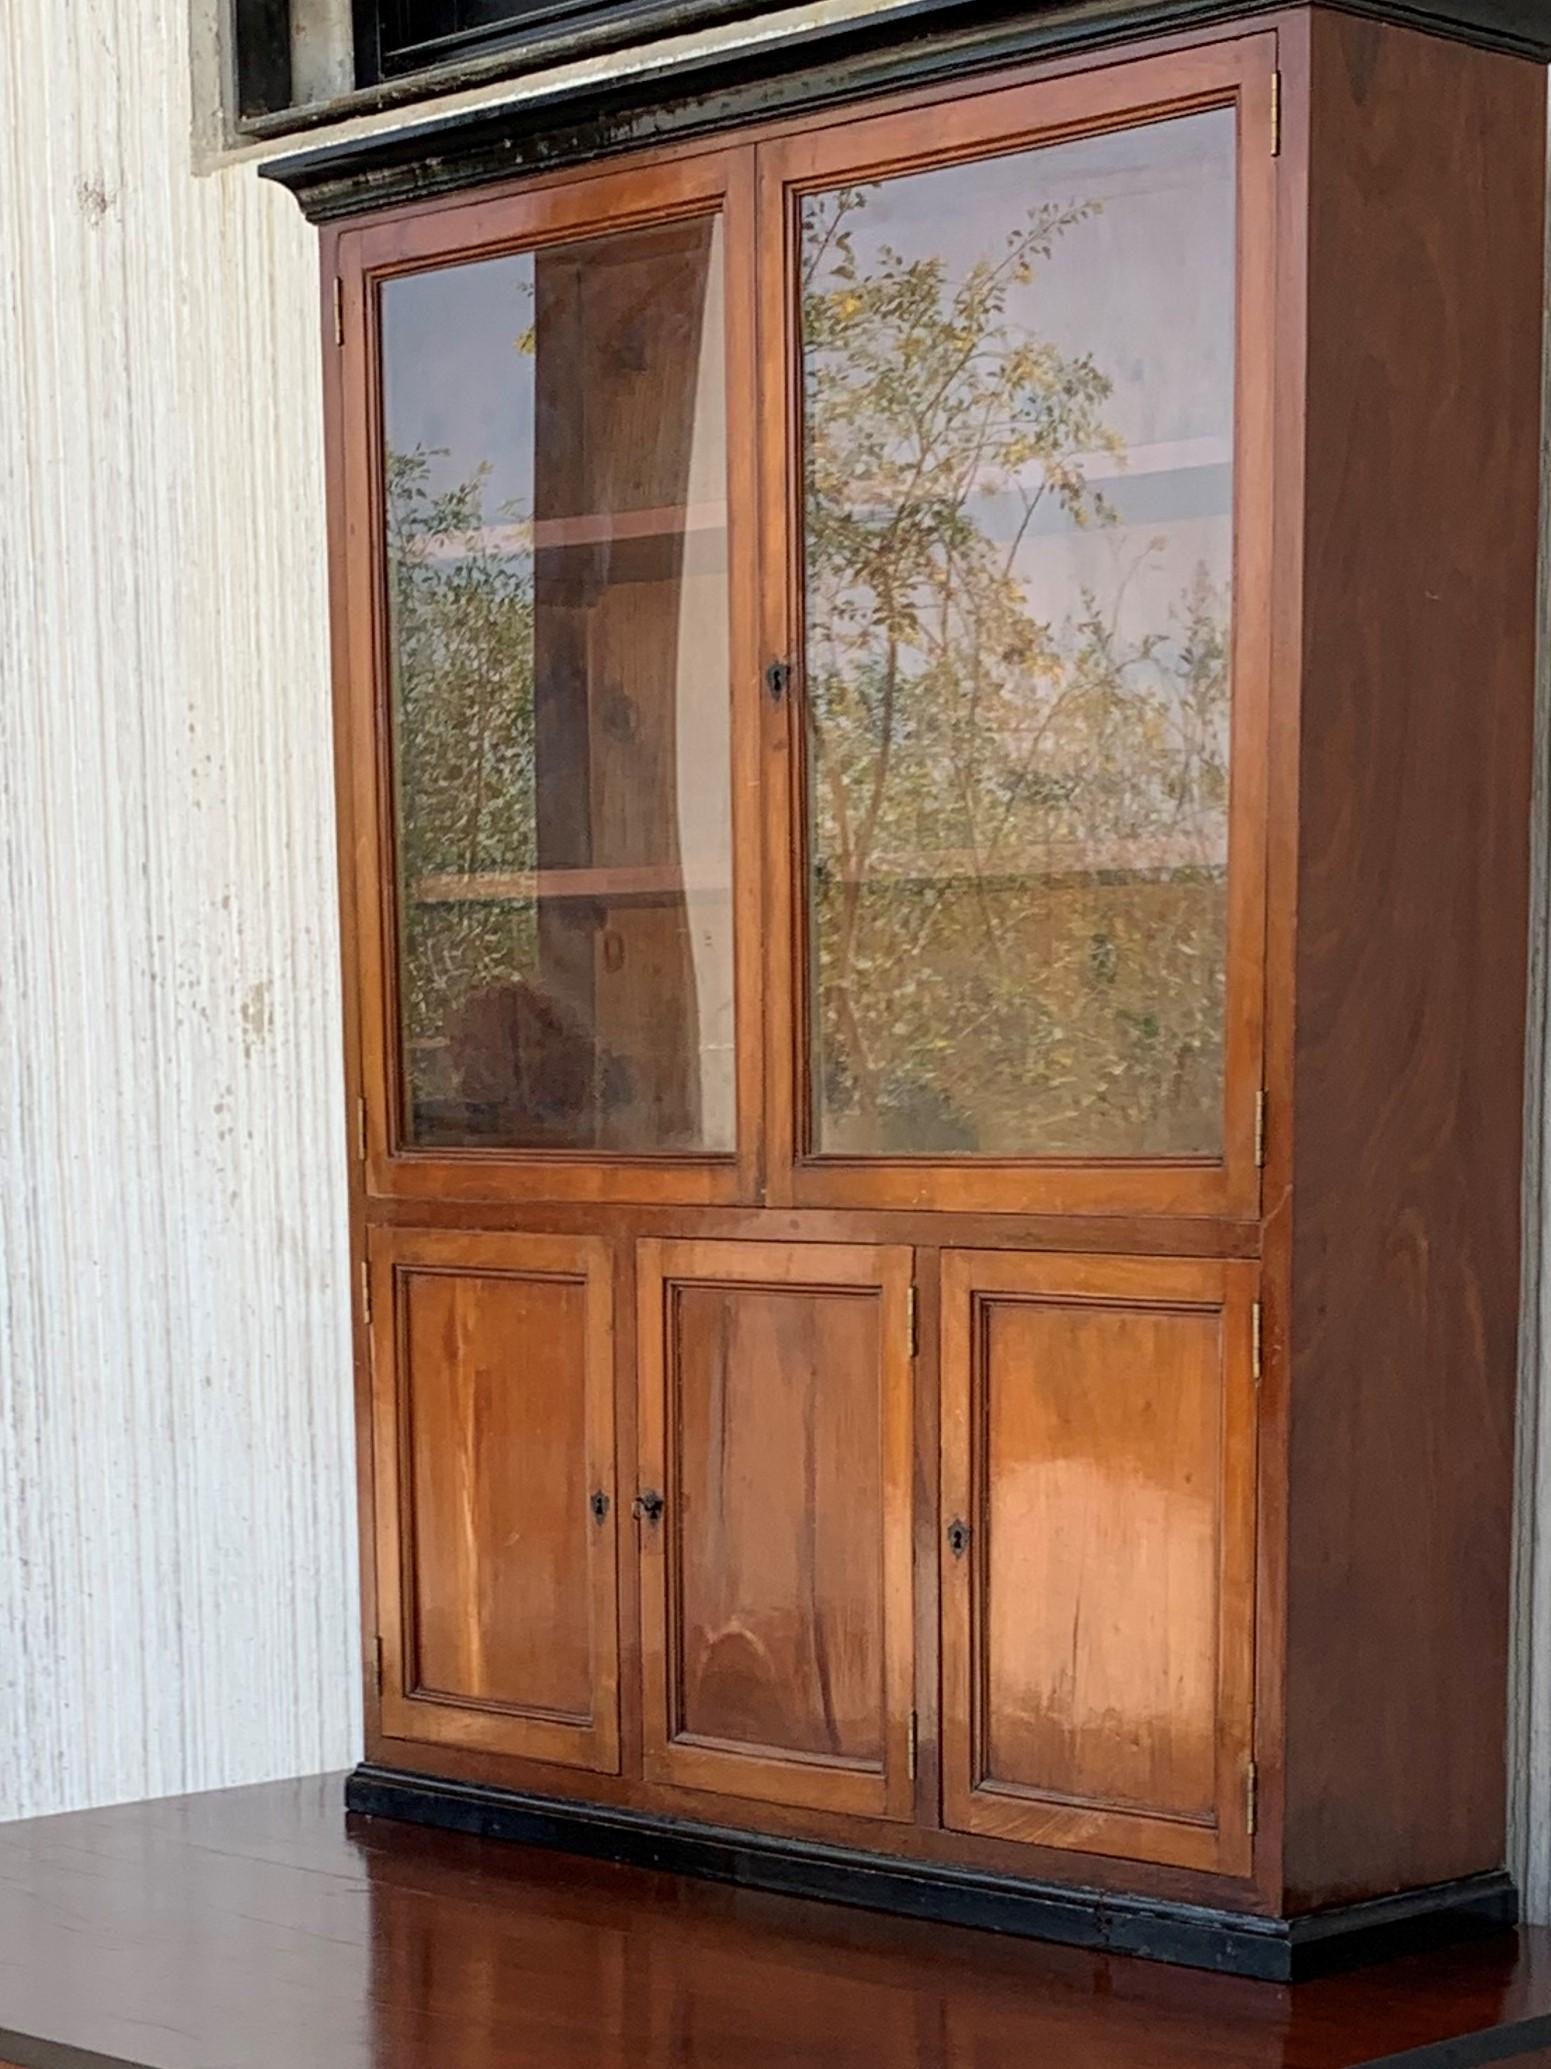 This early (circa 1830) French Provincial plantation style walnut bookcase features an upper part topped by a cornice above two glazed doors opening up to a shelved interior great for either books or display. 

The price includes only the